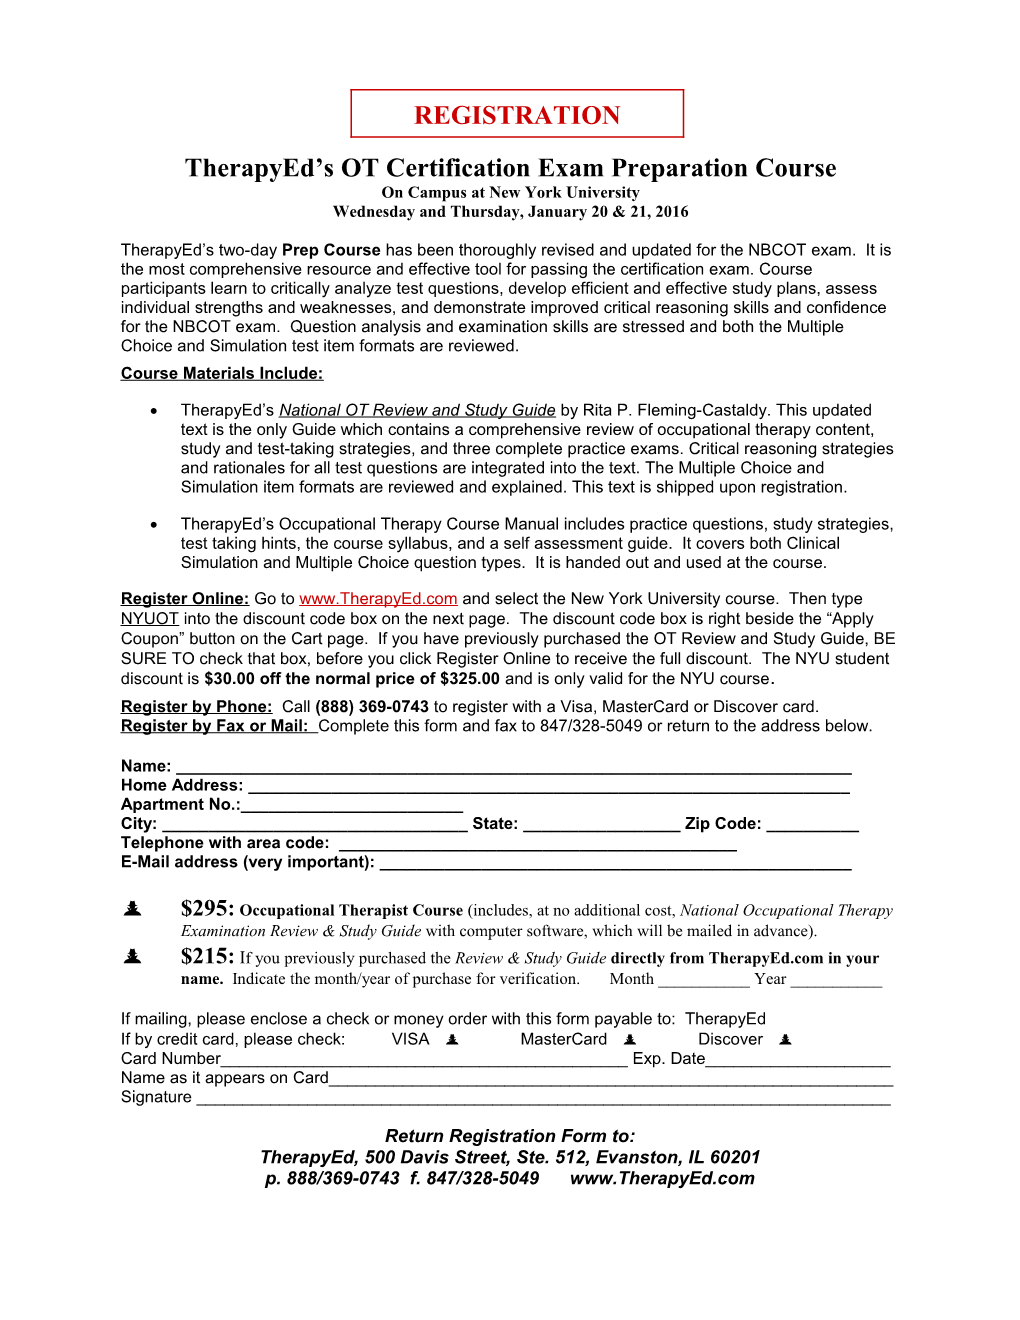 Therapyed Sot Certification Exam Preparation Course